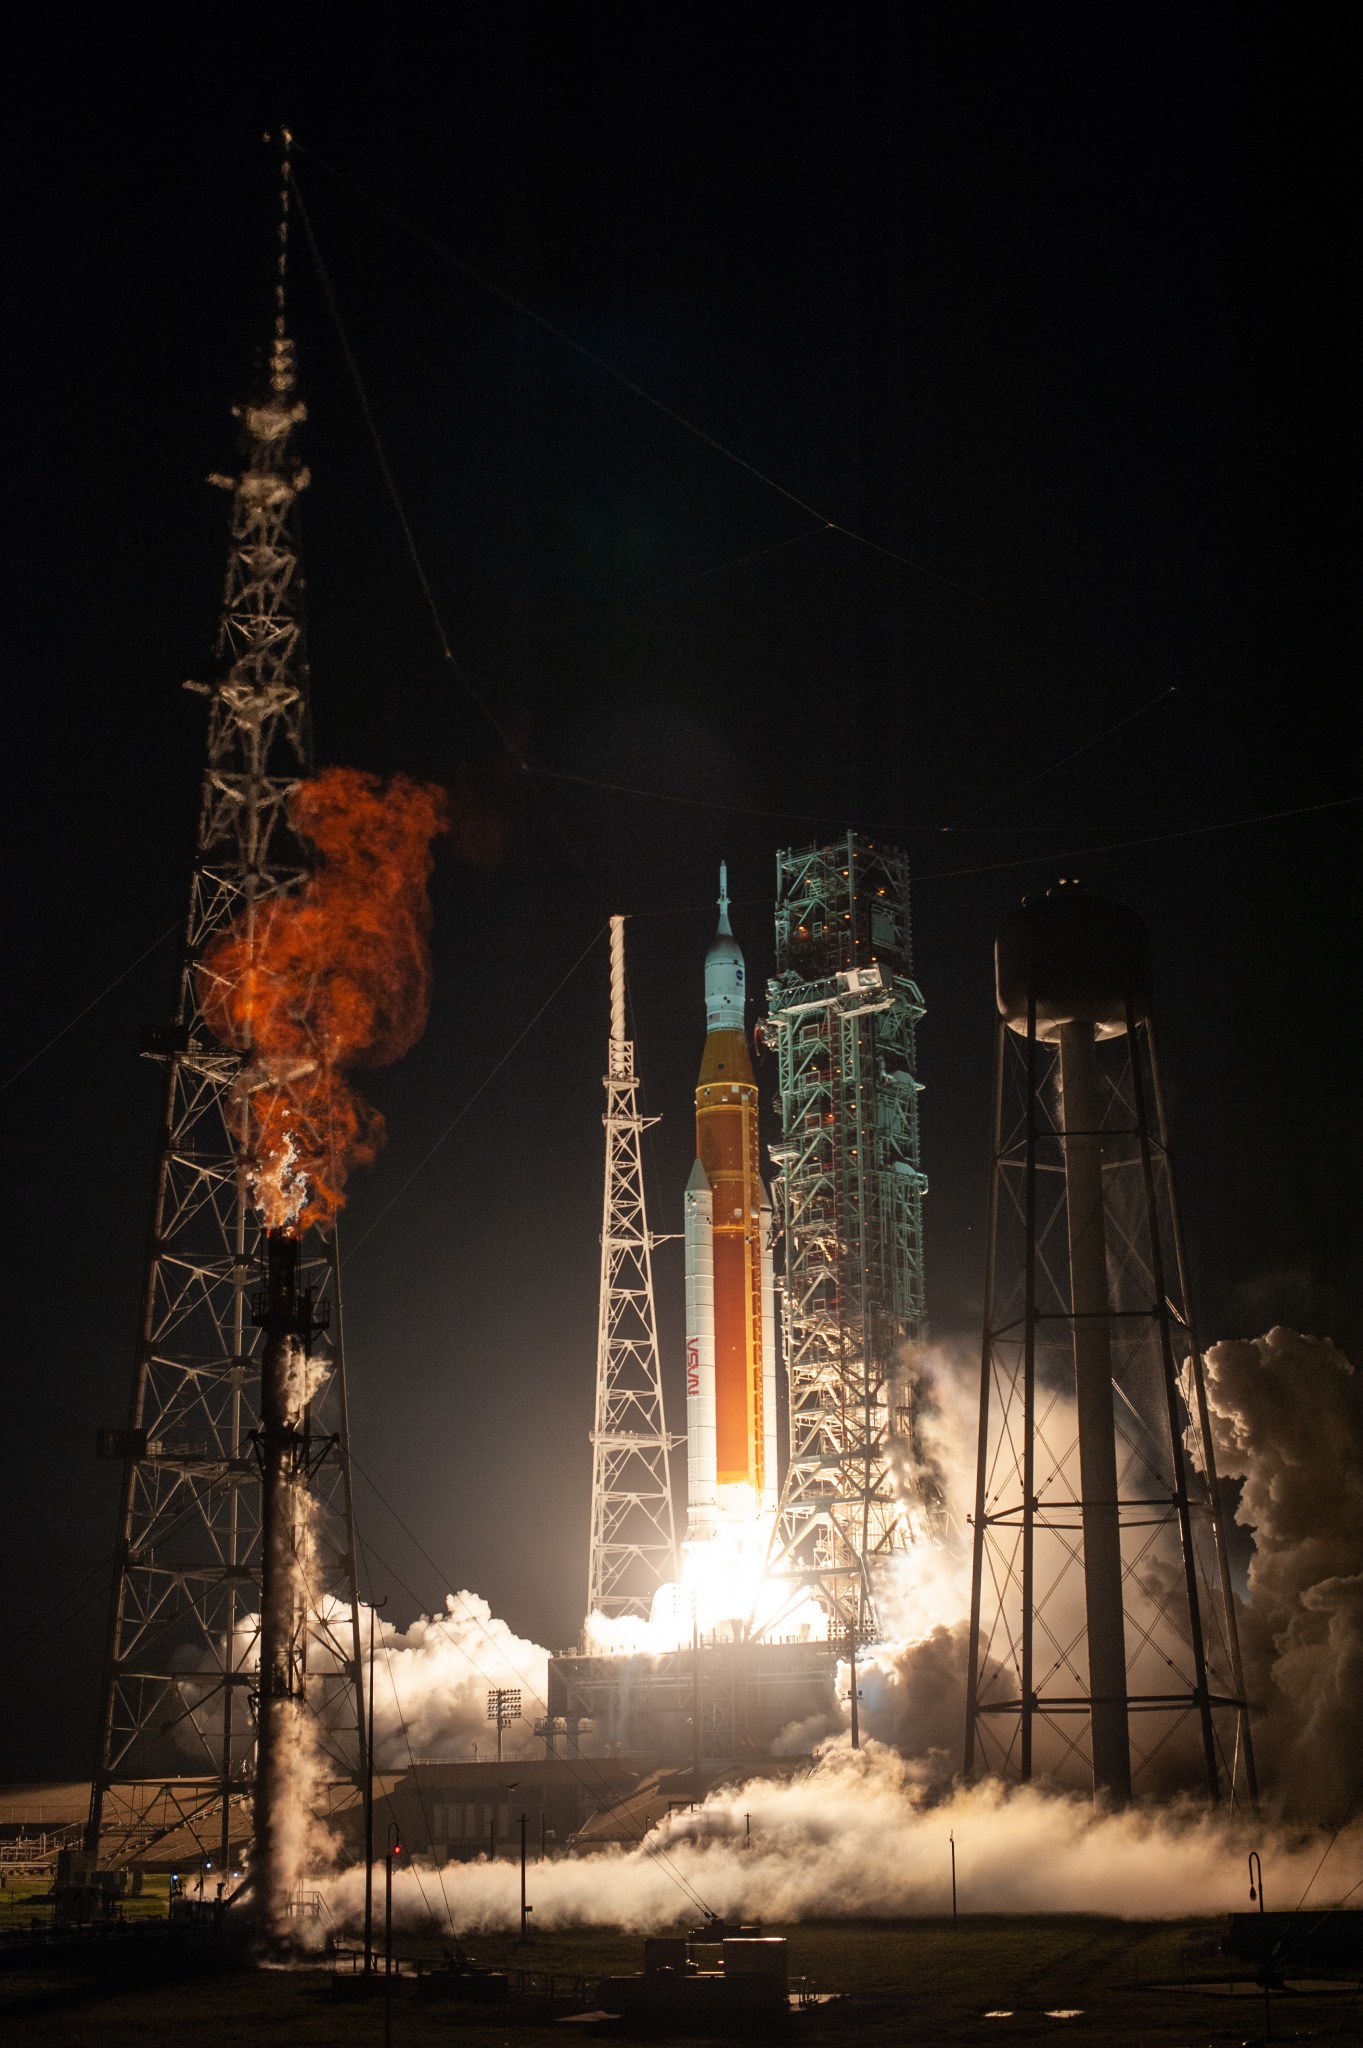 NASA's Space Launch System lifts off from the launch pad, illuminating the ground with a bright white light that bounces off of clouds of smoke. Pictured on the left side of this image is the liquid hydrogen "flare stack" where vented liquid hydrogen is burned off safely.